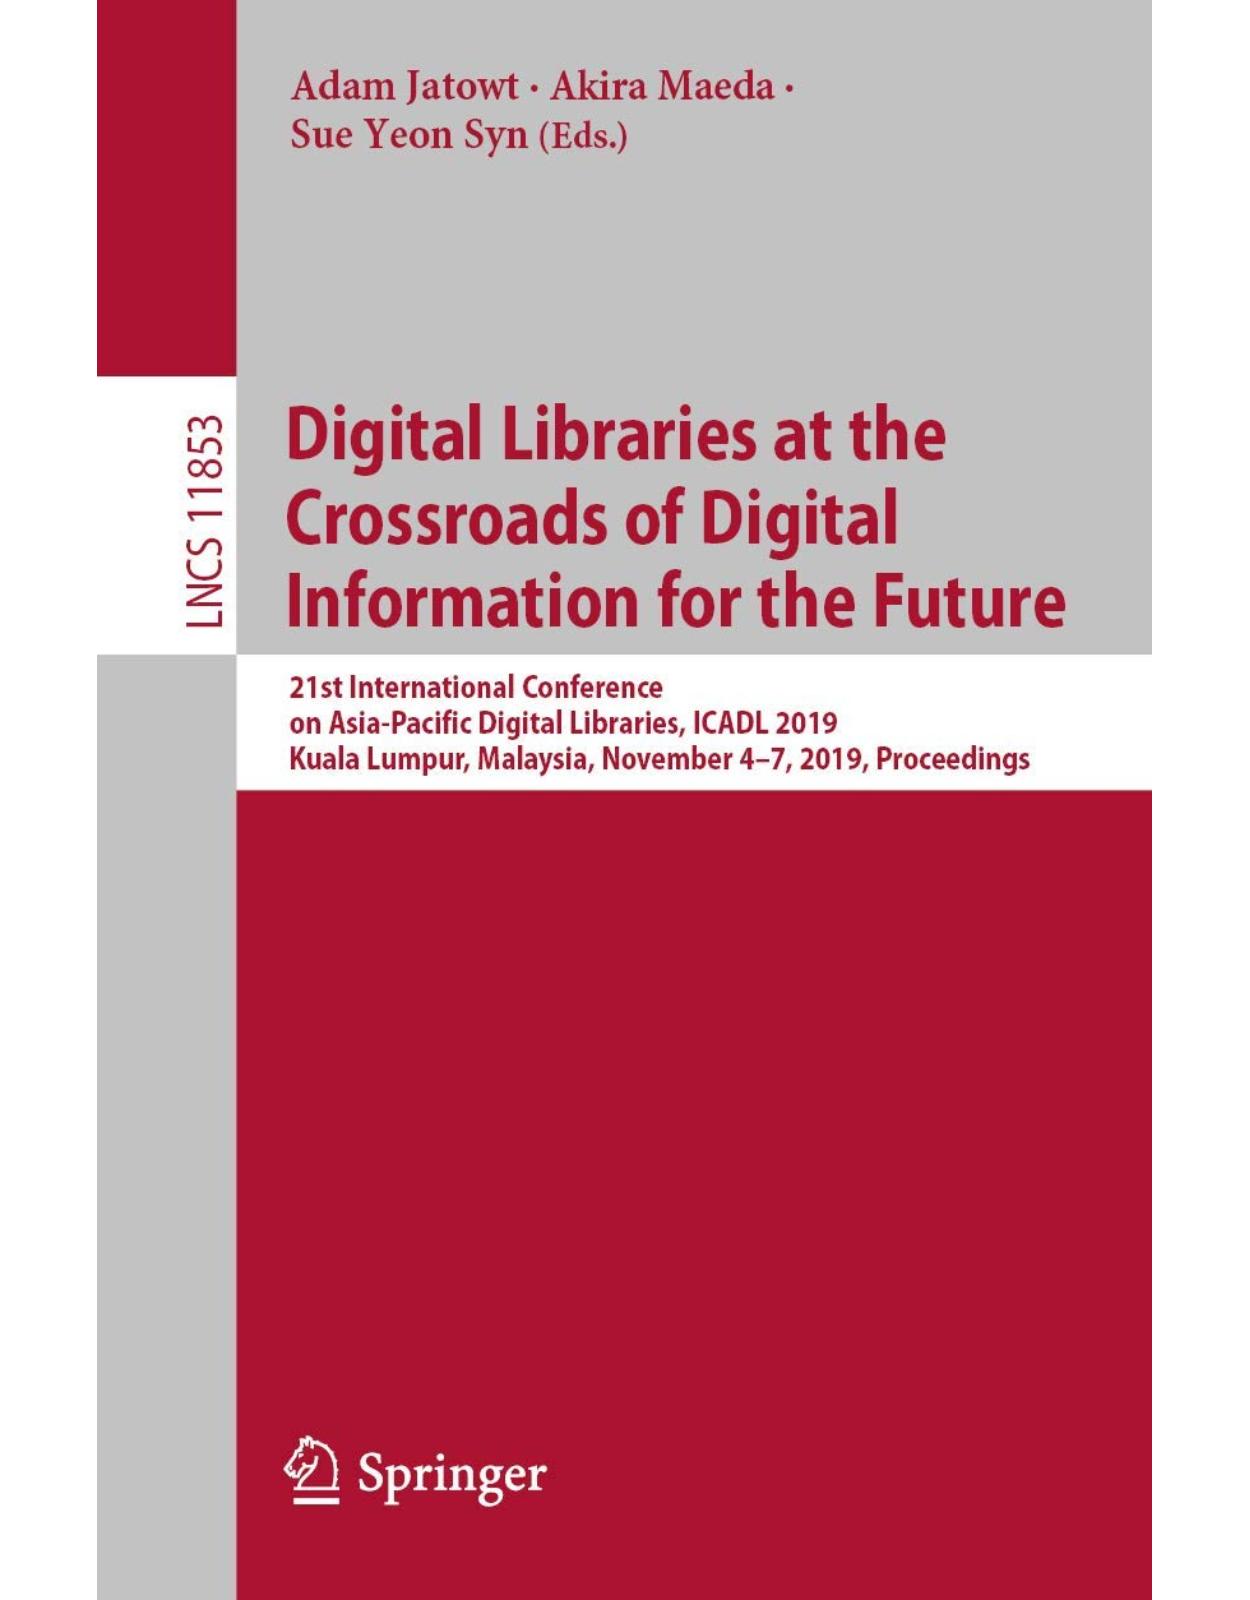 Digital Libraries at the Crossroads of Digital Information for the Future 21st International Conference on Asia-Pacific Digital Libraries, ICADL 2019, Kuala Lumpur, Malaysia, November 4–7, 2019, Proceedings